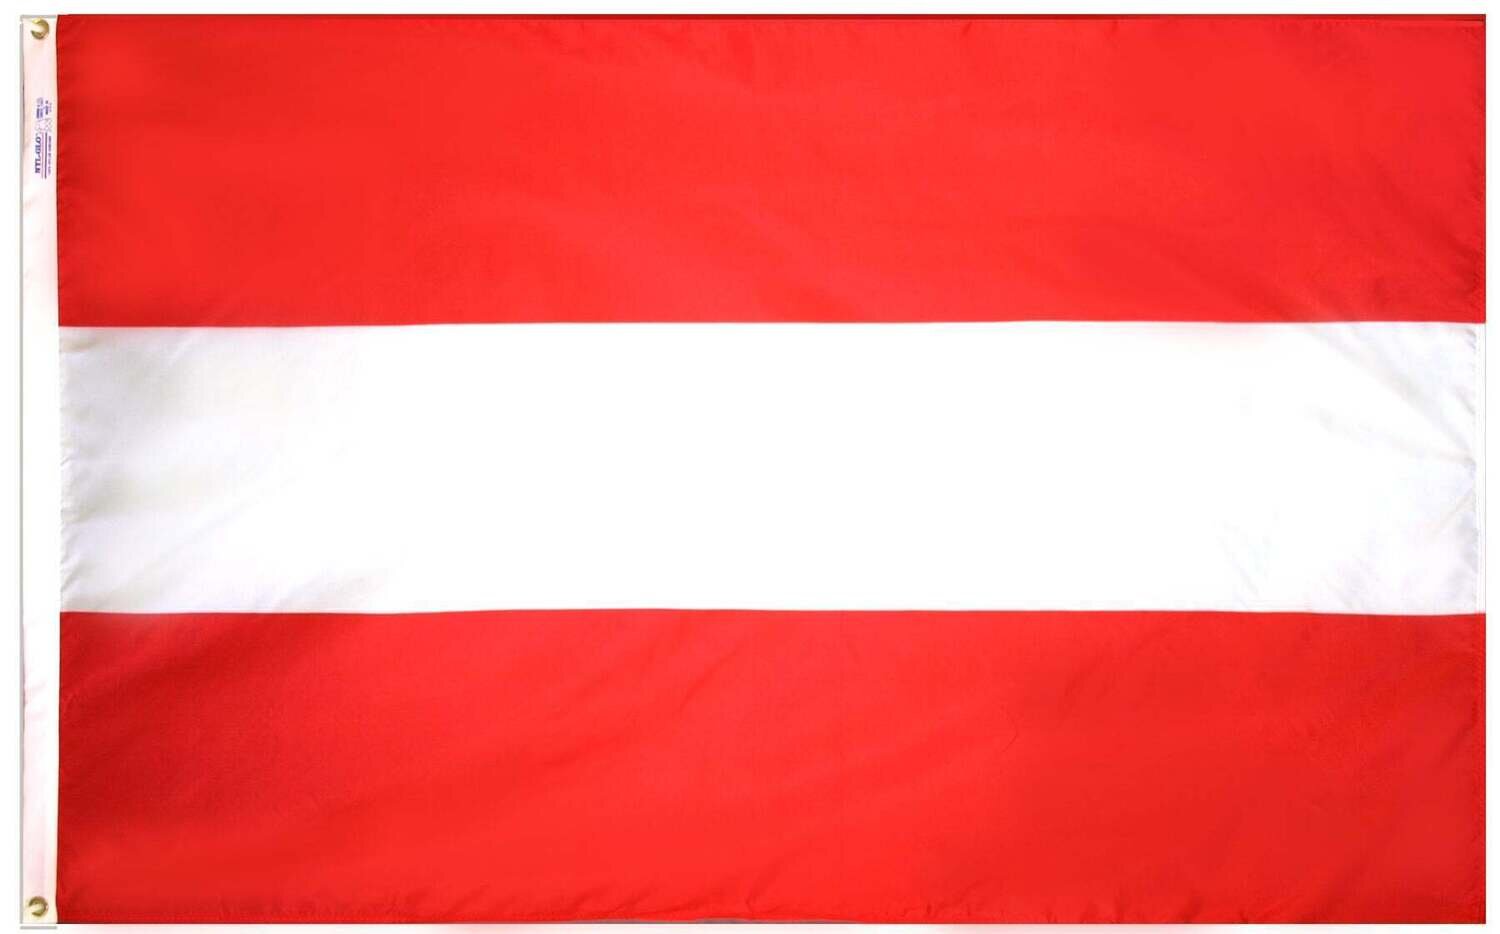 Austria Flag 2x3 ft. Nylon SolarGuard Nyl-Glo 100% Made in USA to Official United Nations Design Specifications.